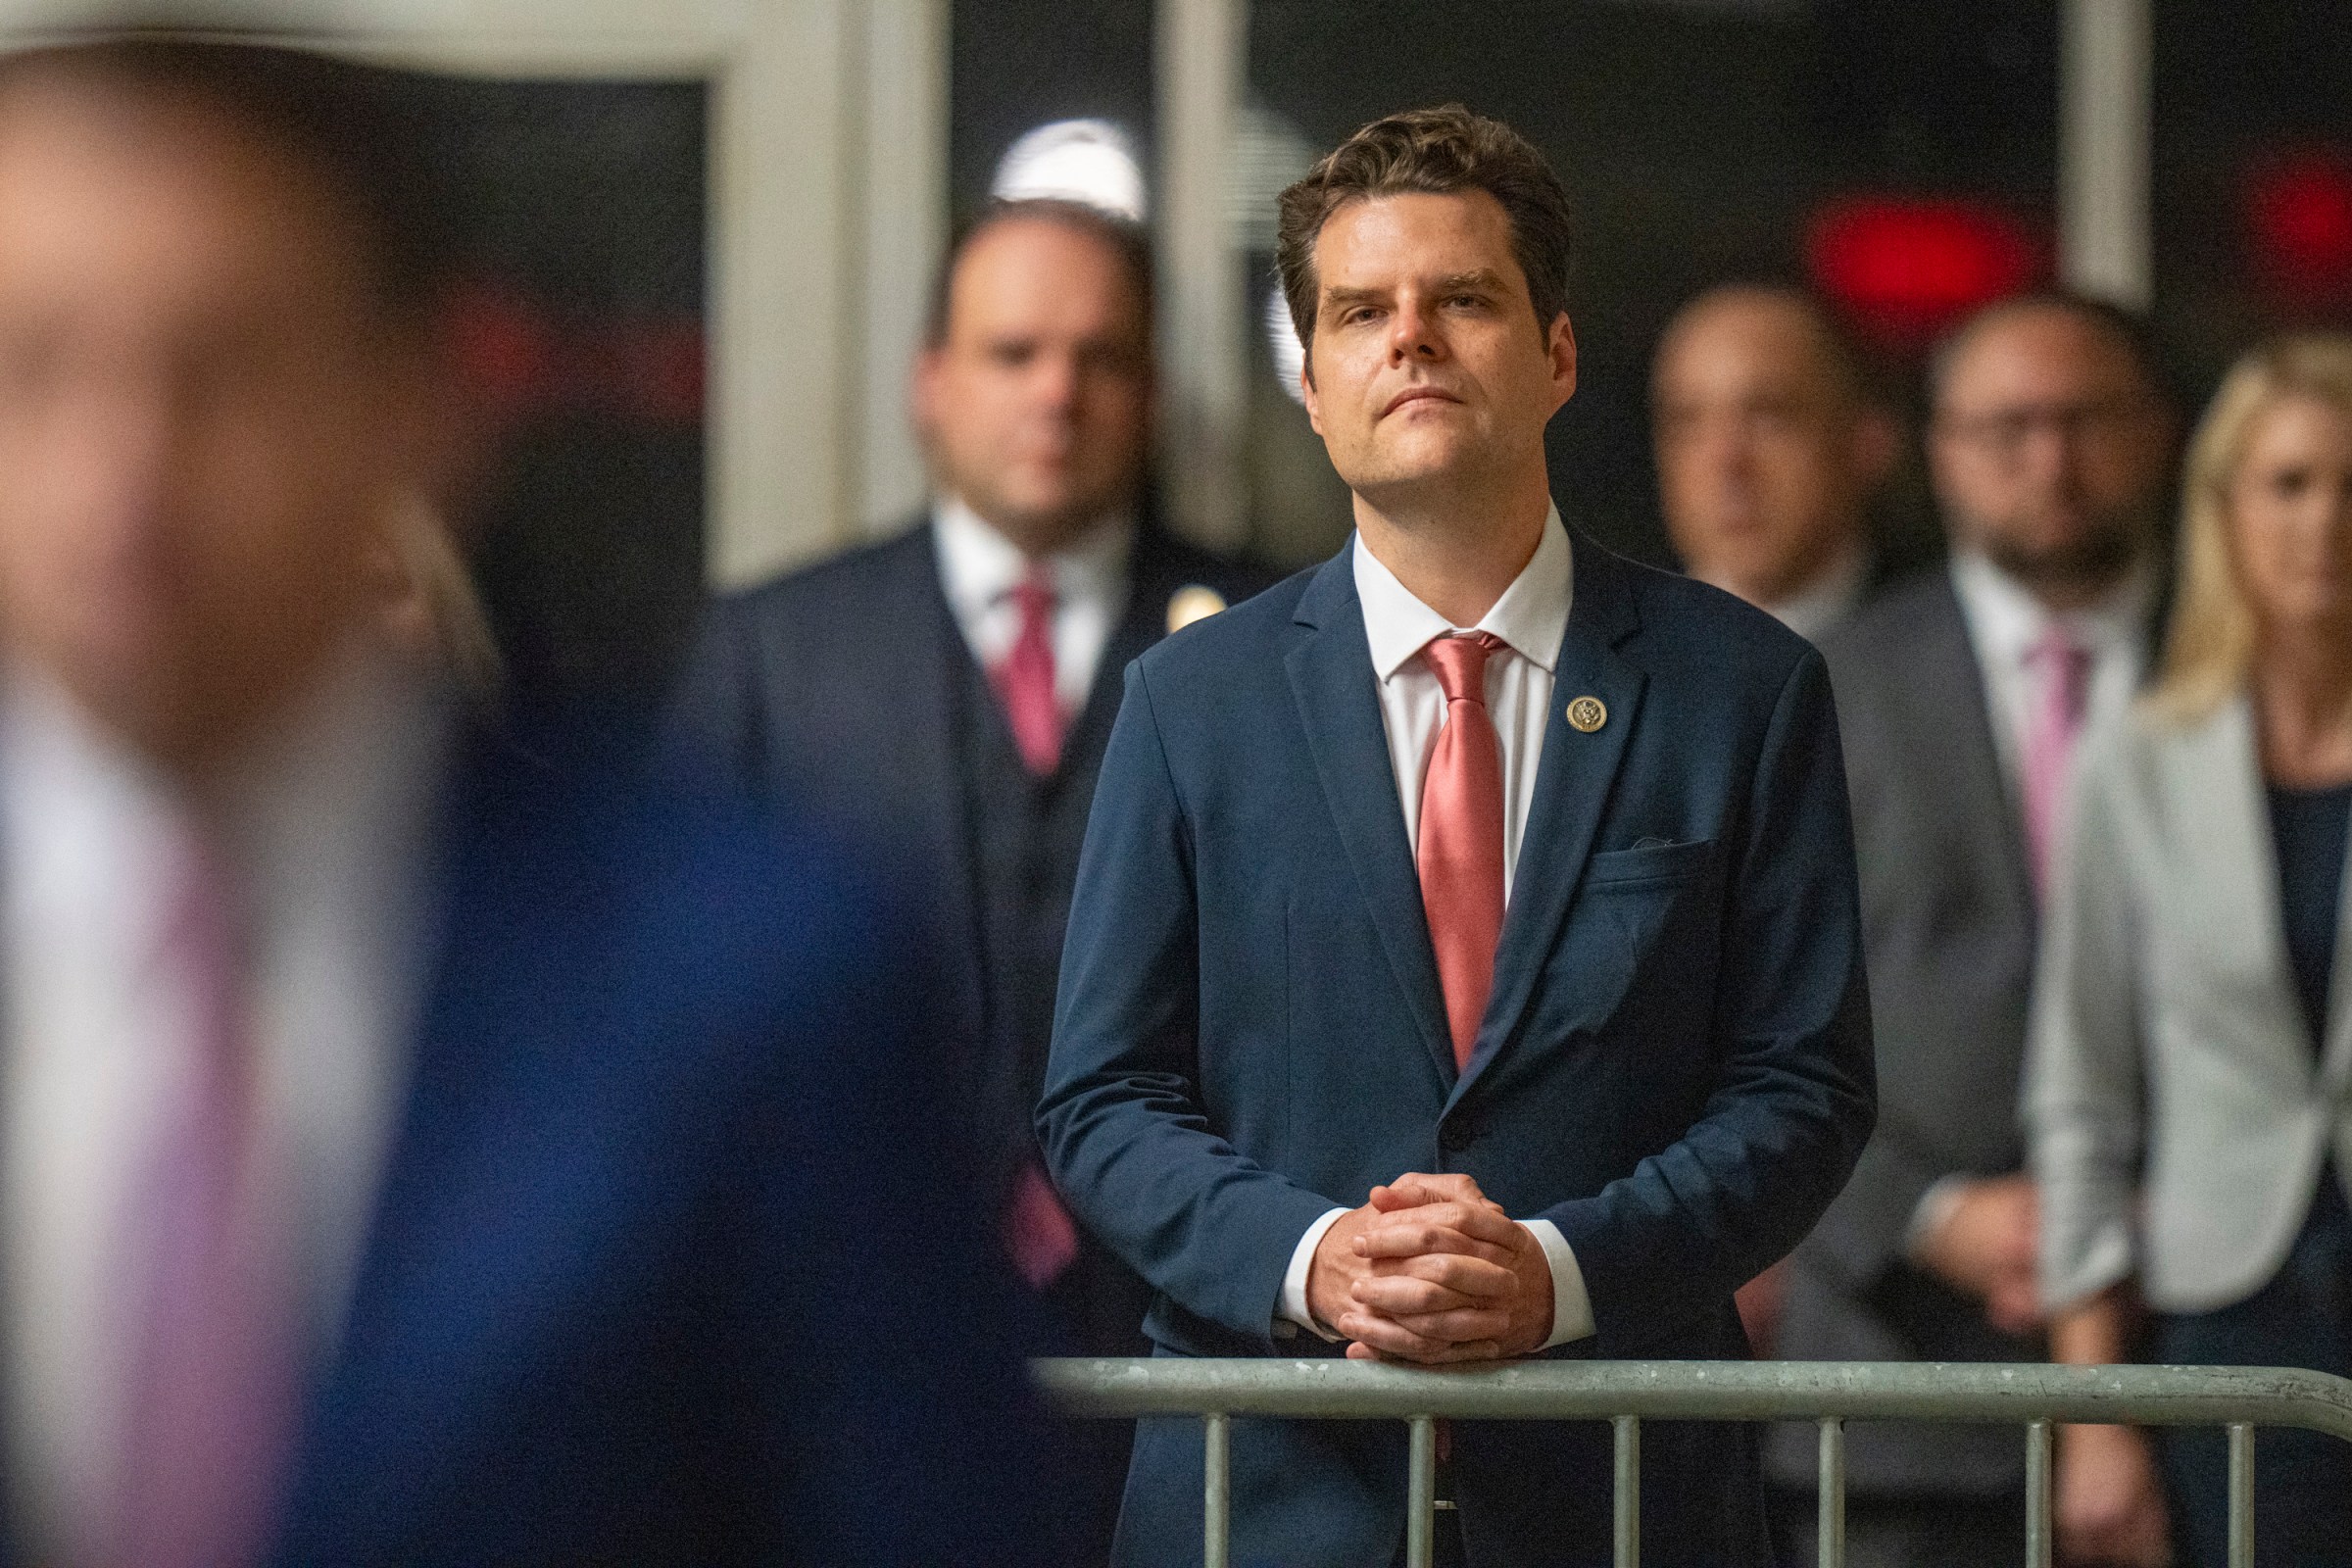 Mat Gaetz standing at a metal barricade in a dark suit and red tie.